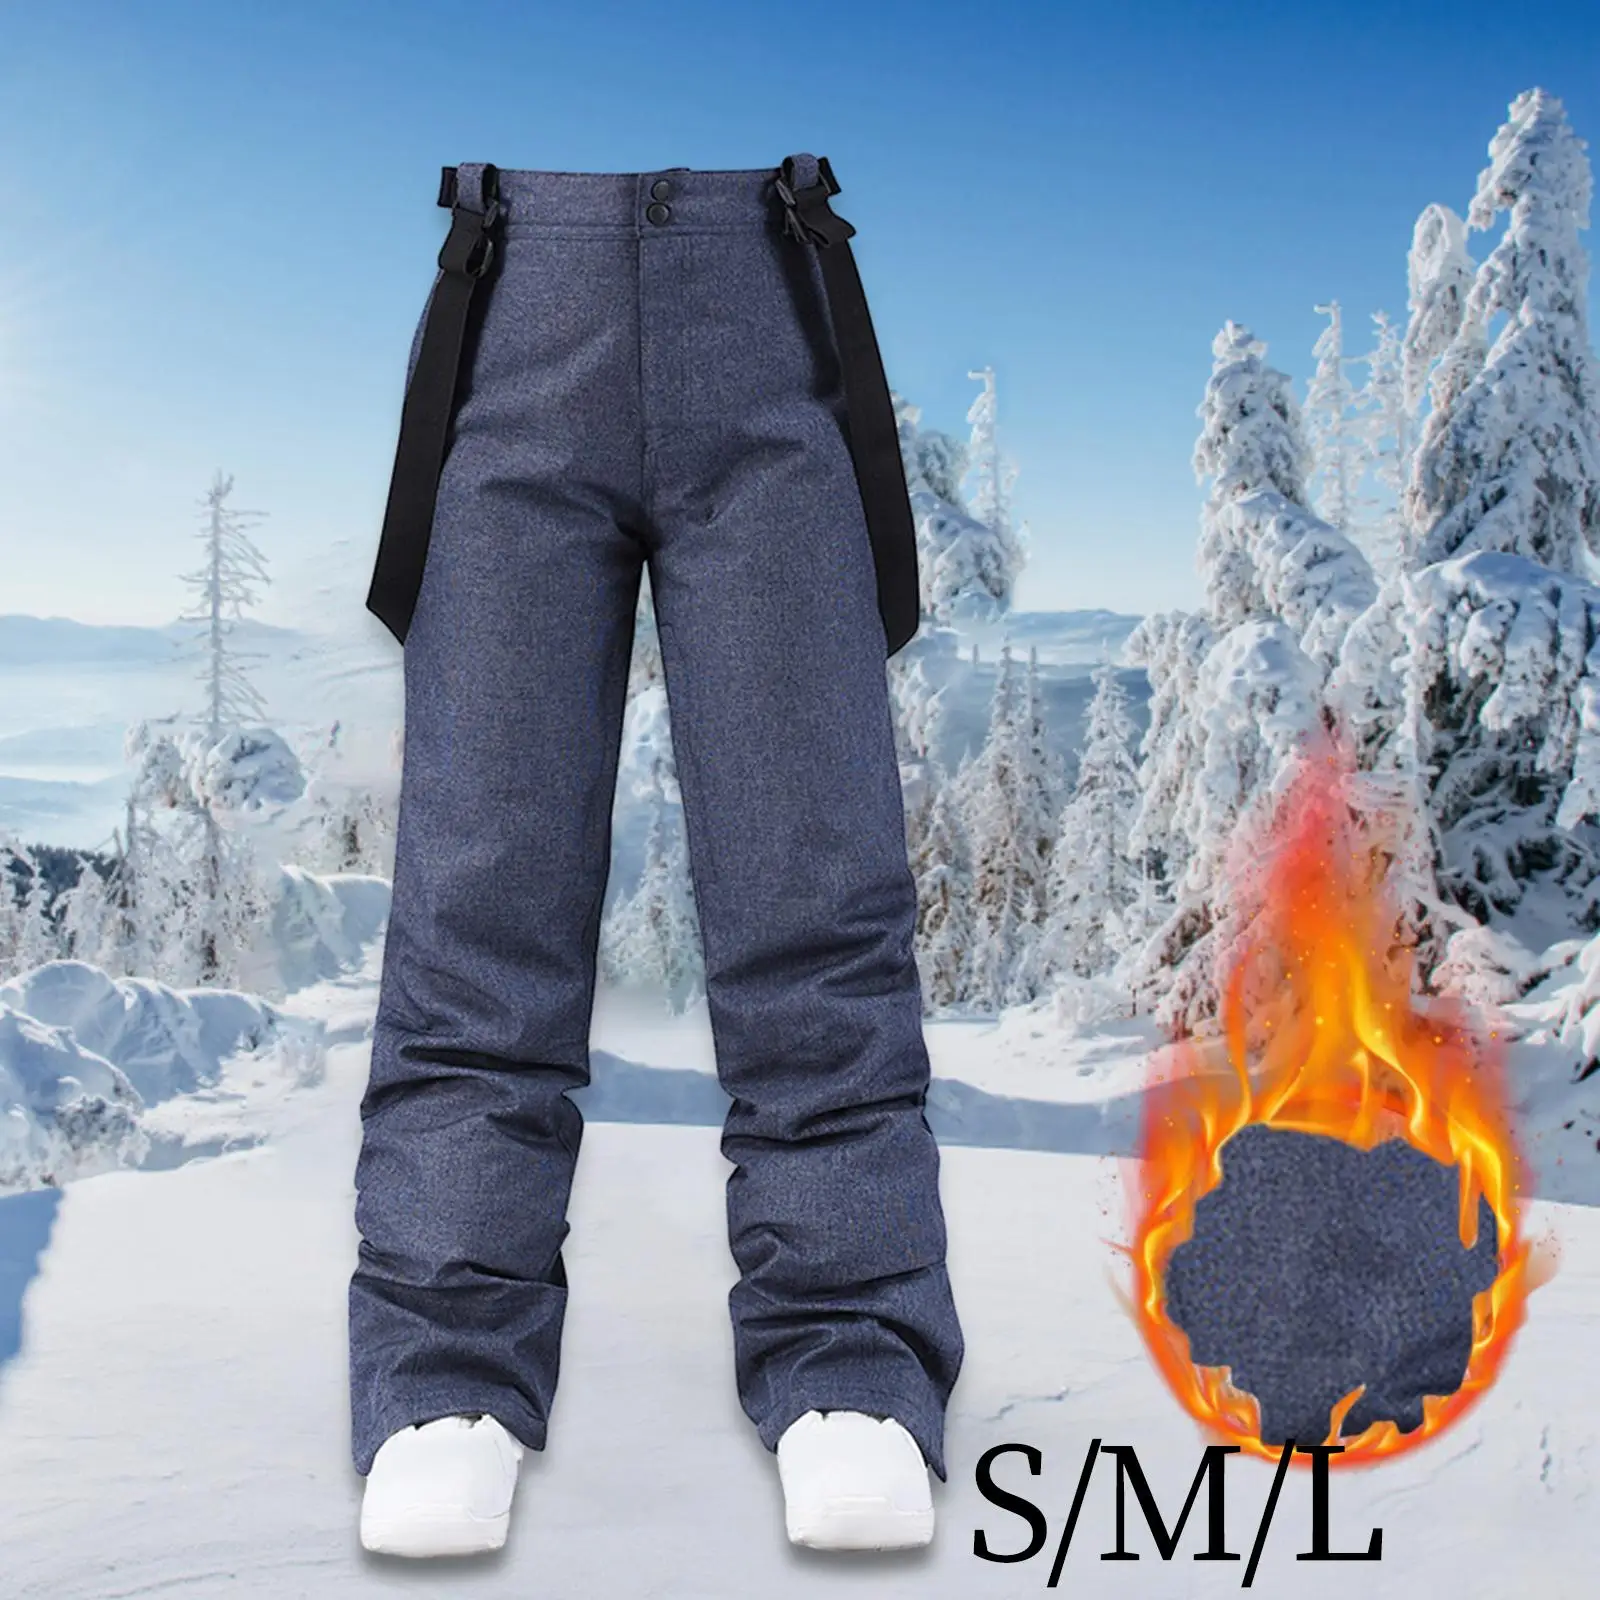 Snowboarding Pants Snow Sports Pants Insulated Warm Windproof Lightweight Unisex Ski Bibs Overalls Snow Trousers for Hiking